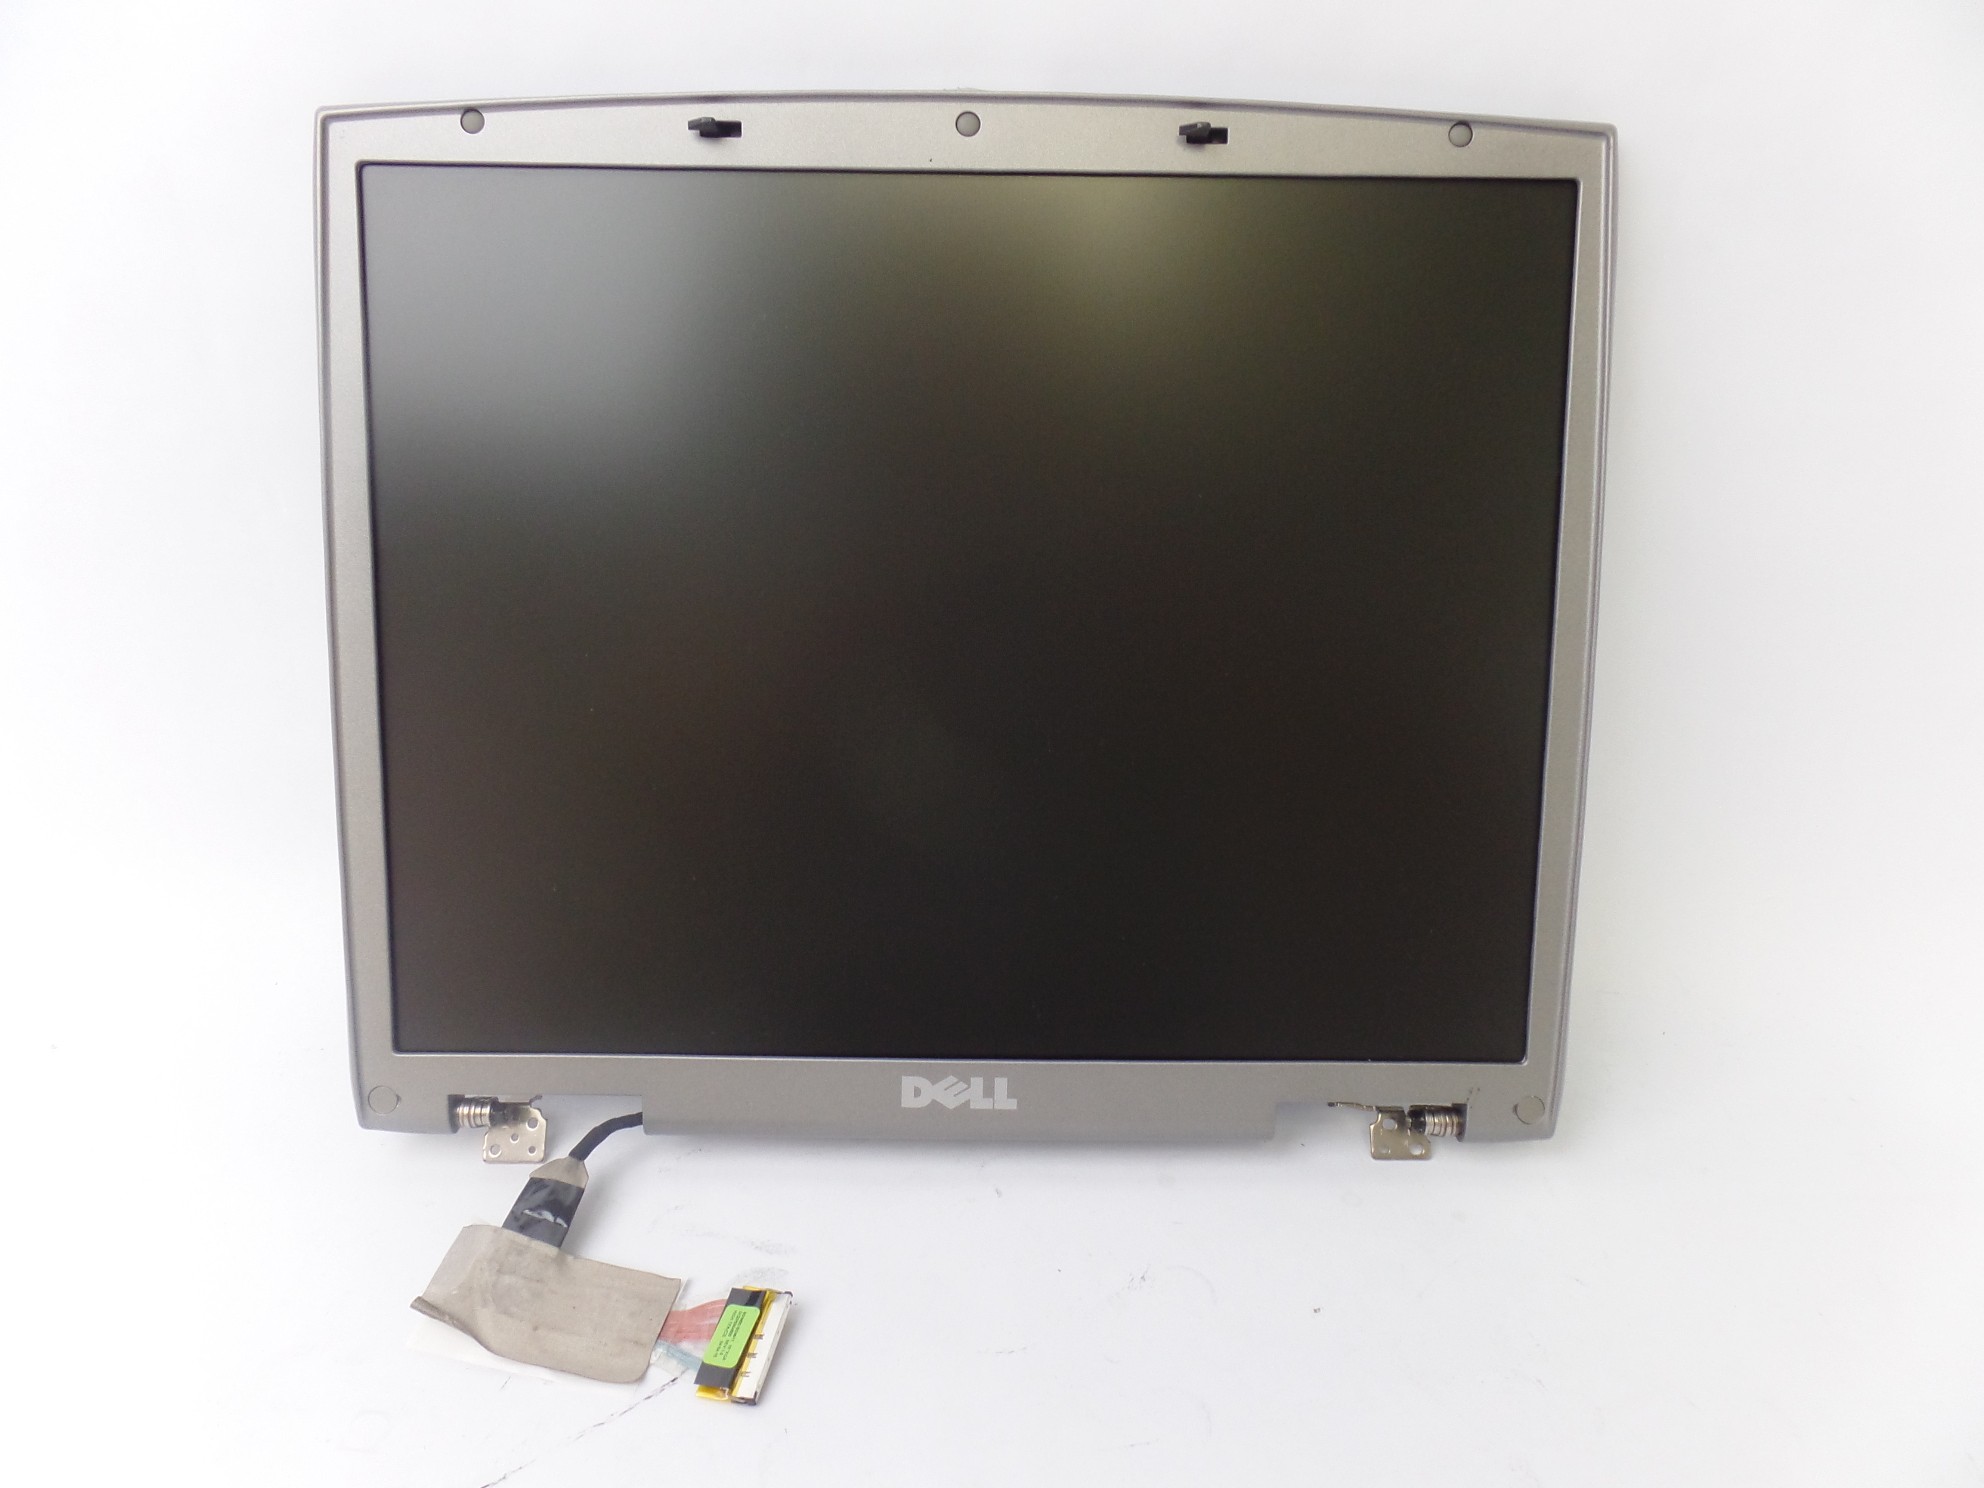 LCD Top Cover + Screen + Hinges + Power Button assembly for Dell Inspiron 5150